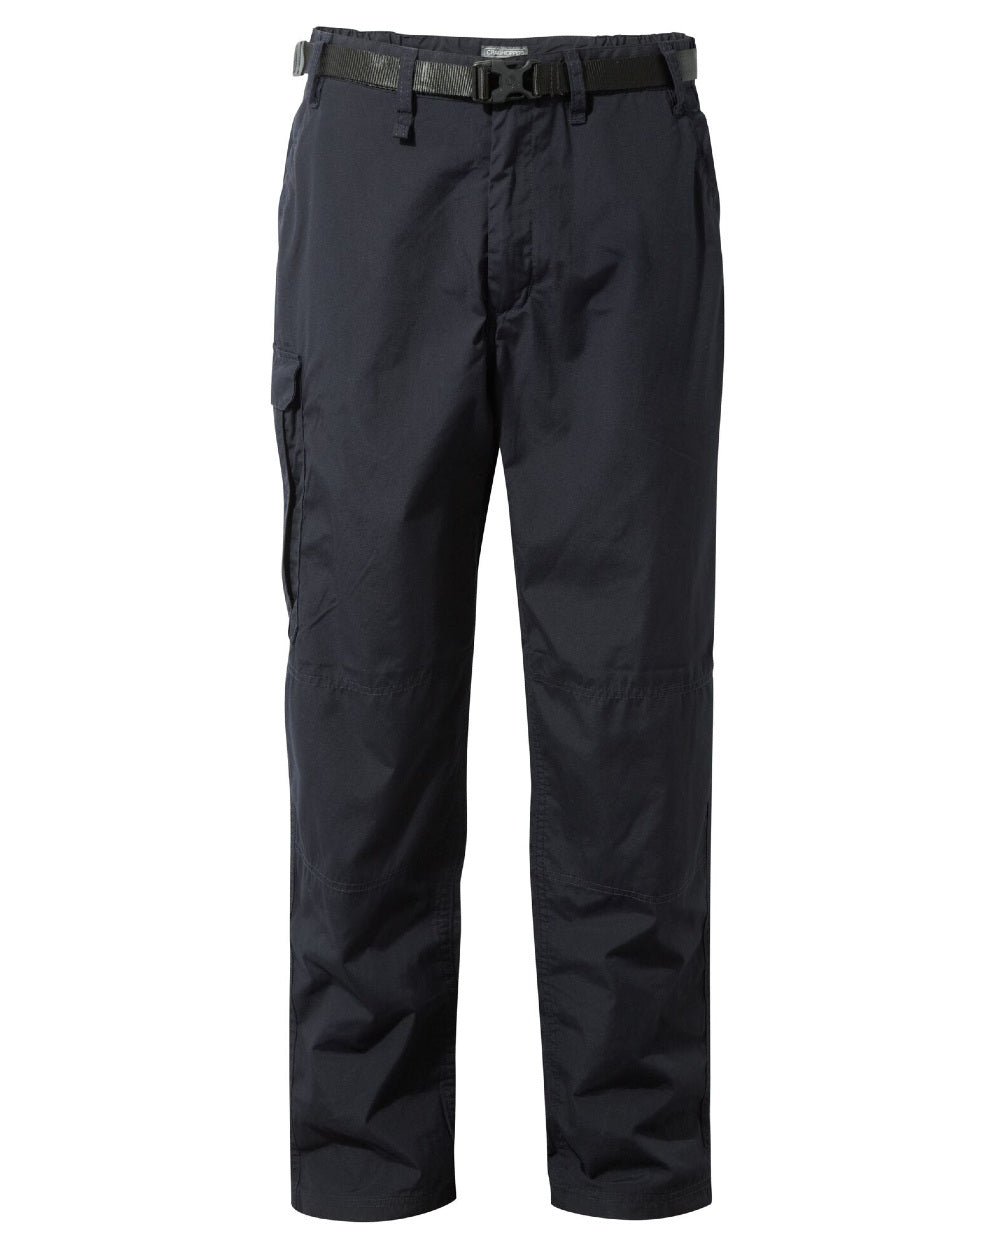 Dark Navy Coloured Craghoppers Mens Kiwi Classic Trousers On A White Background 